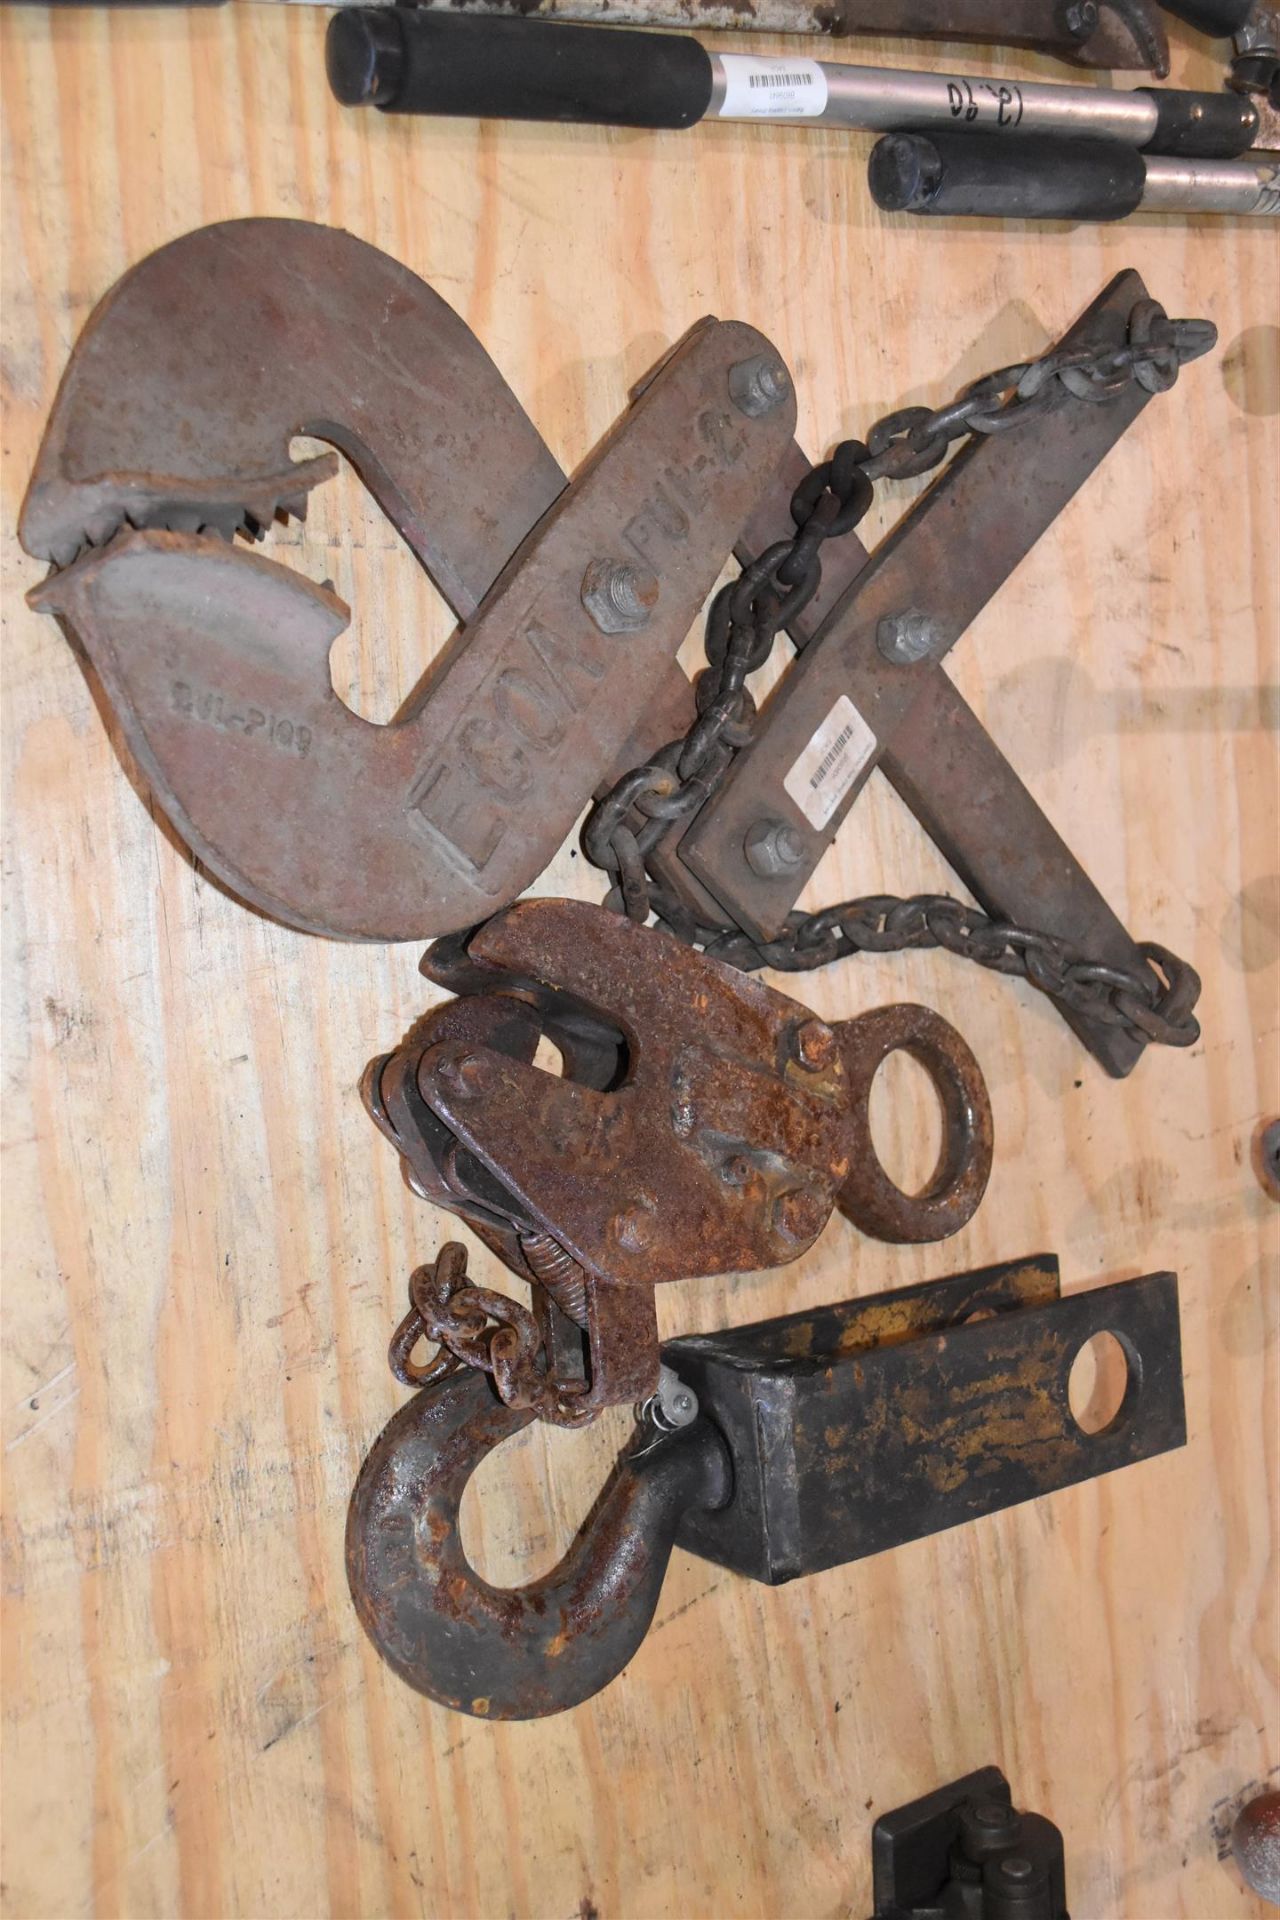 Pallet Puller, Plate Clamp, and Hook